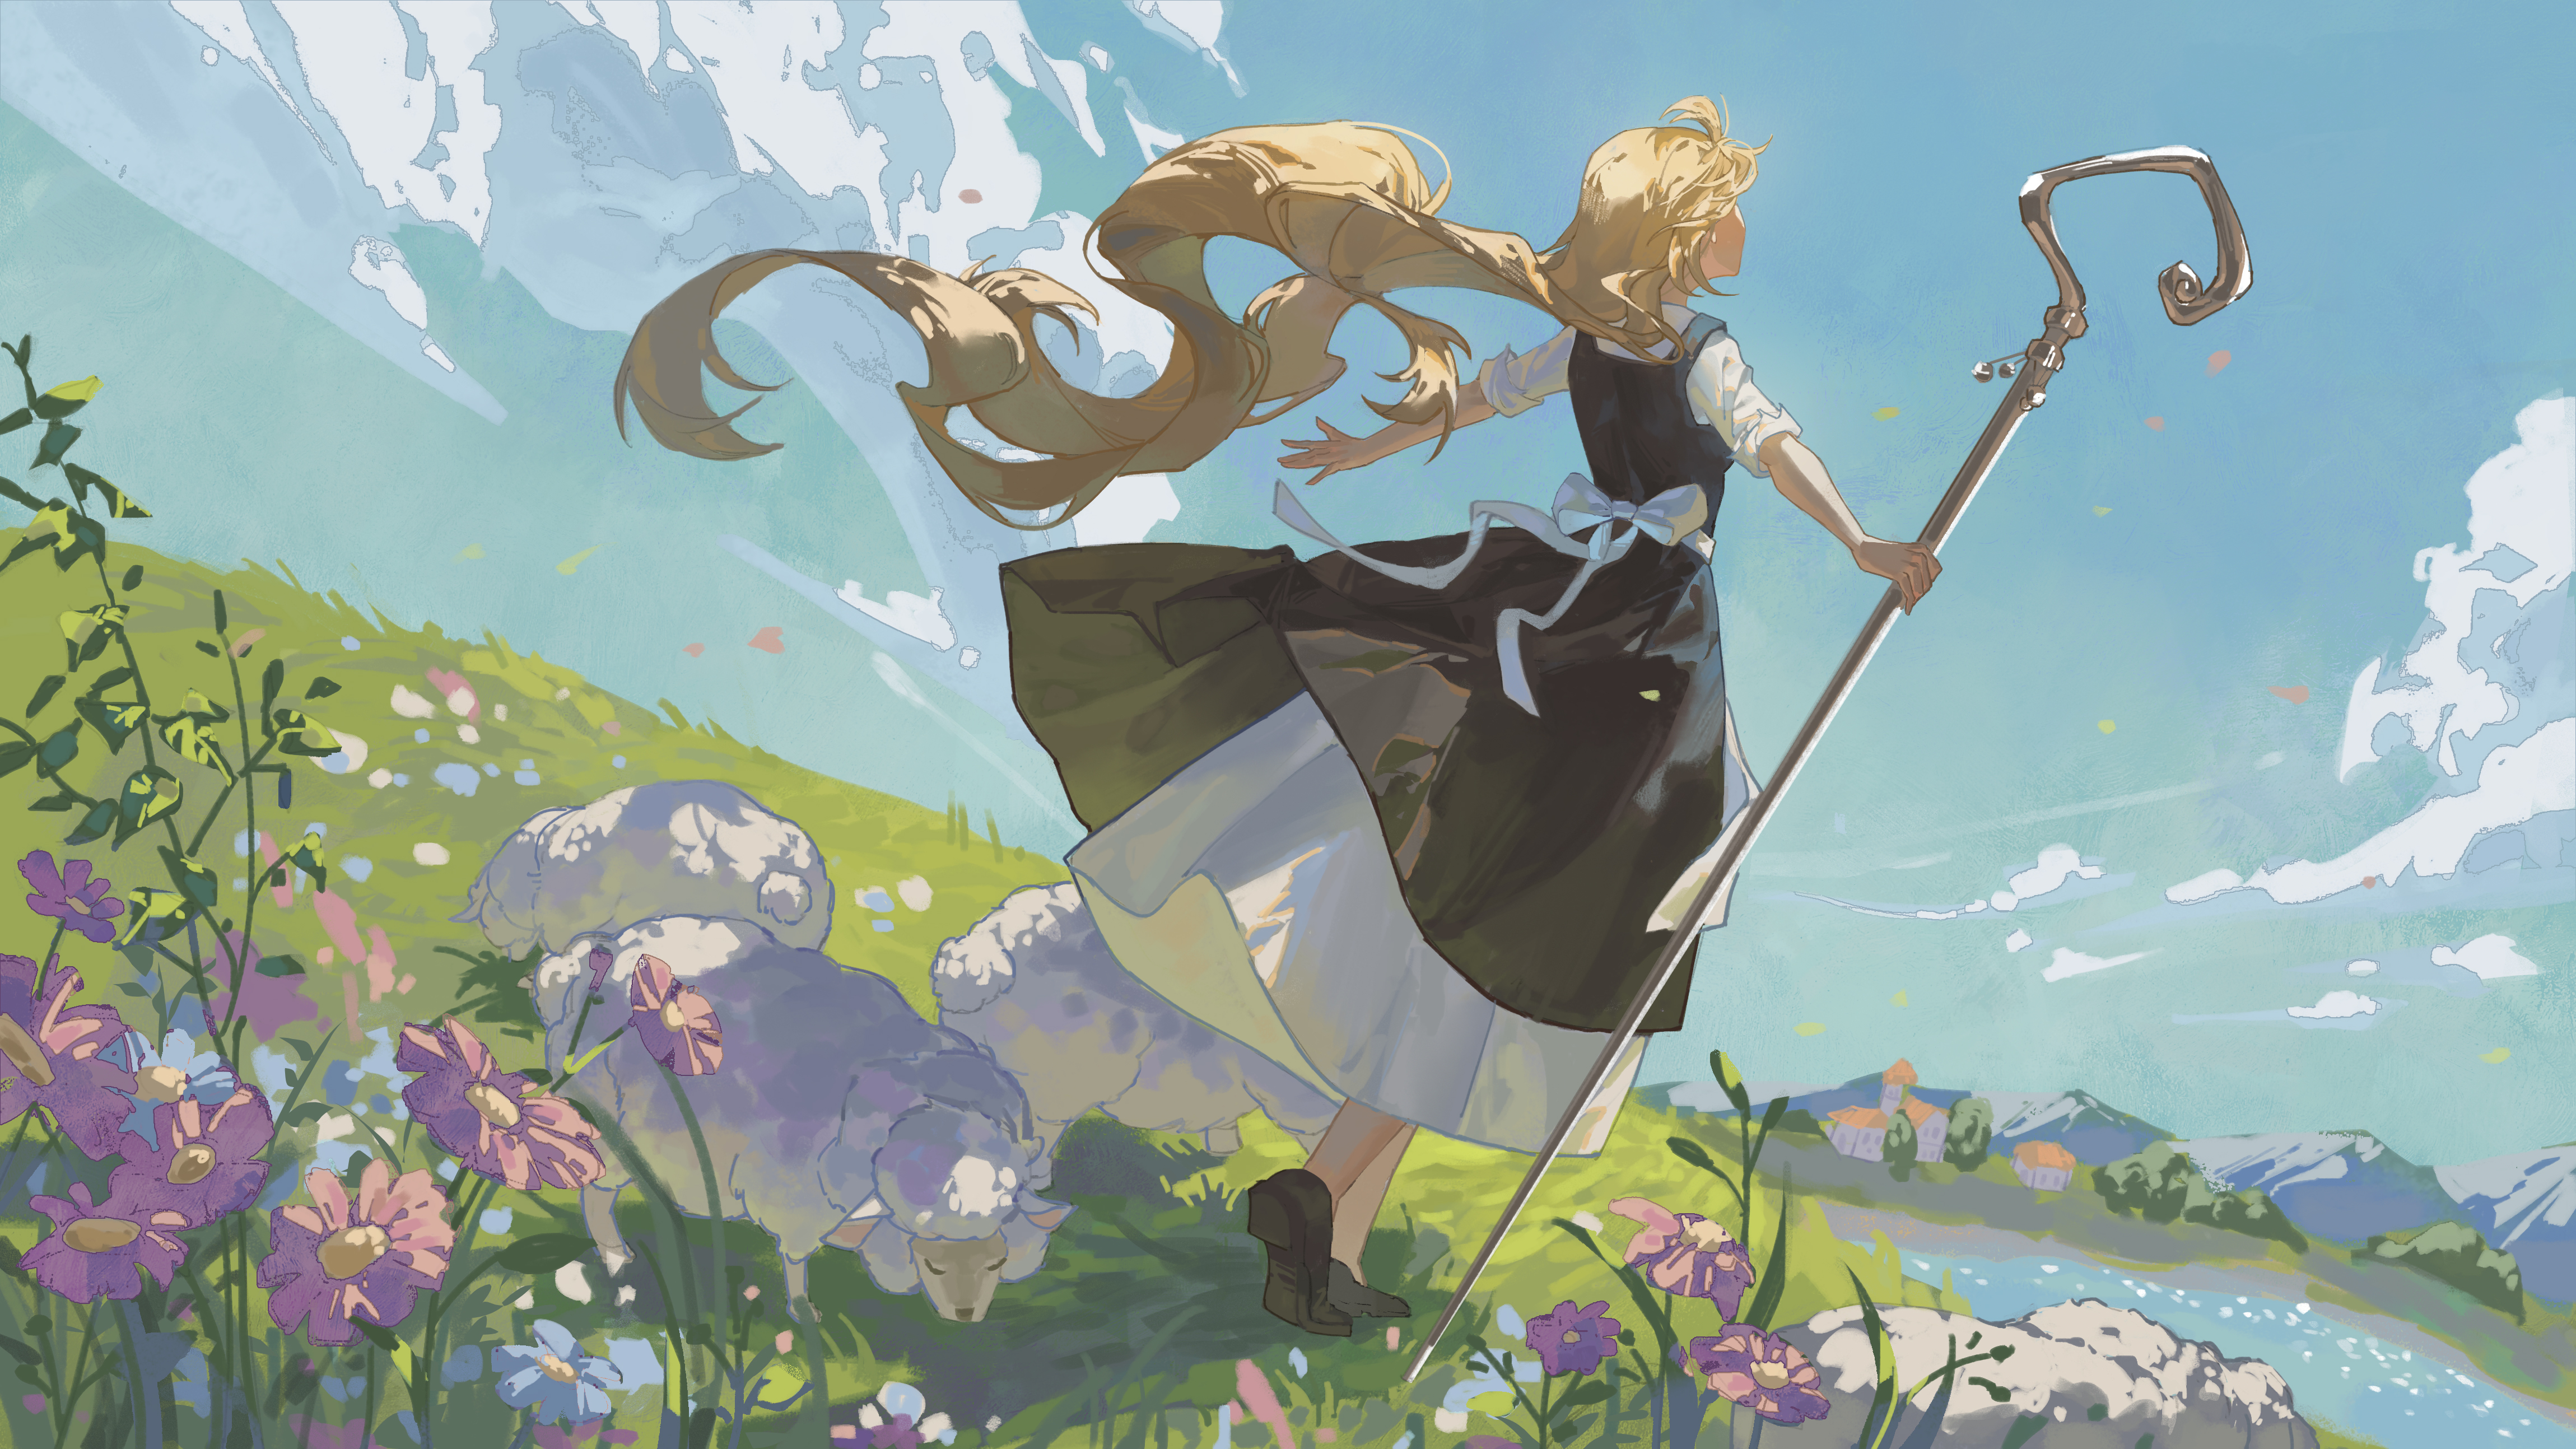 Anime 4599x2587 anime anime girls long hair blonde flowers grass sky clouds water mountains standing looking up sheep animals leaves